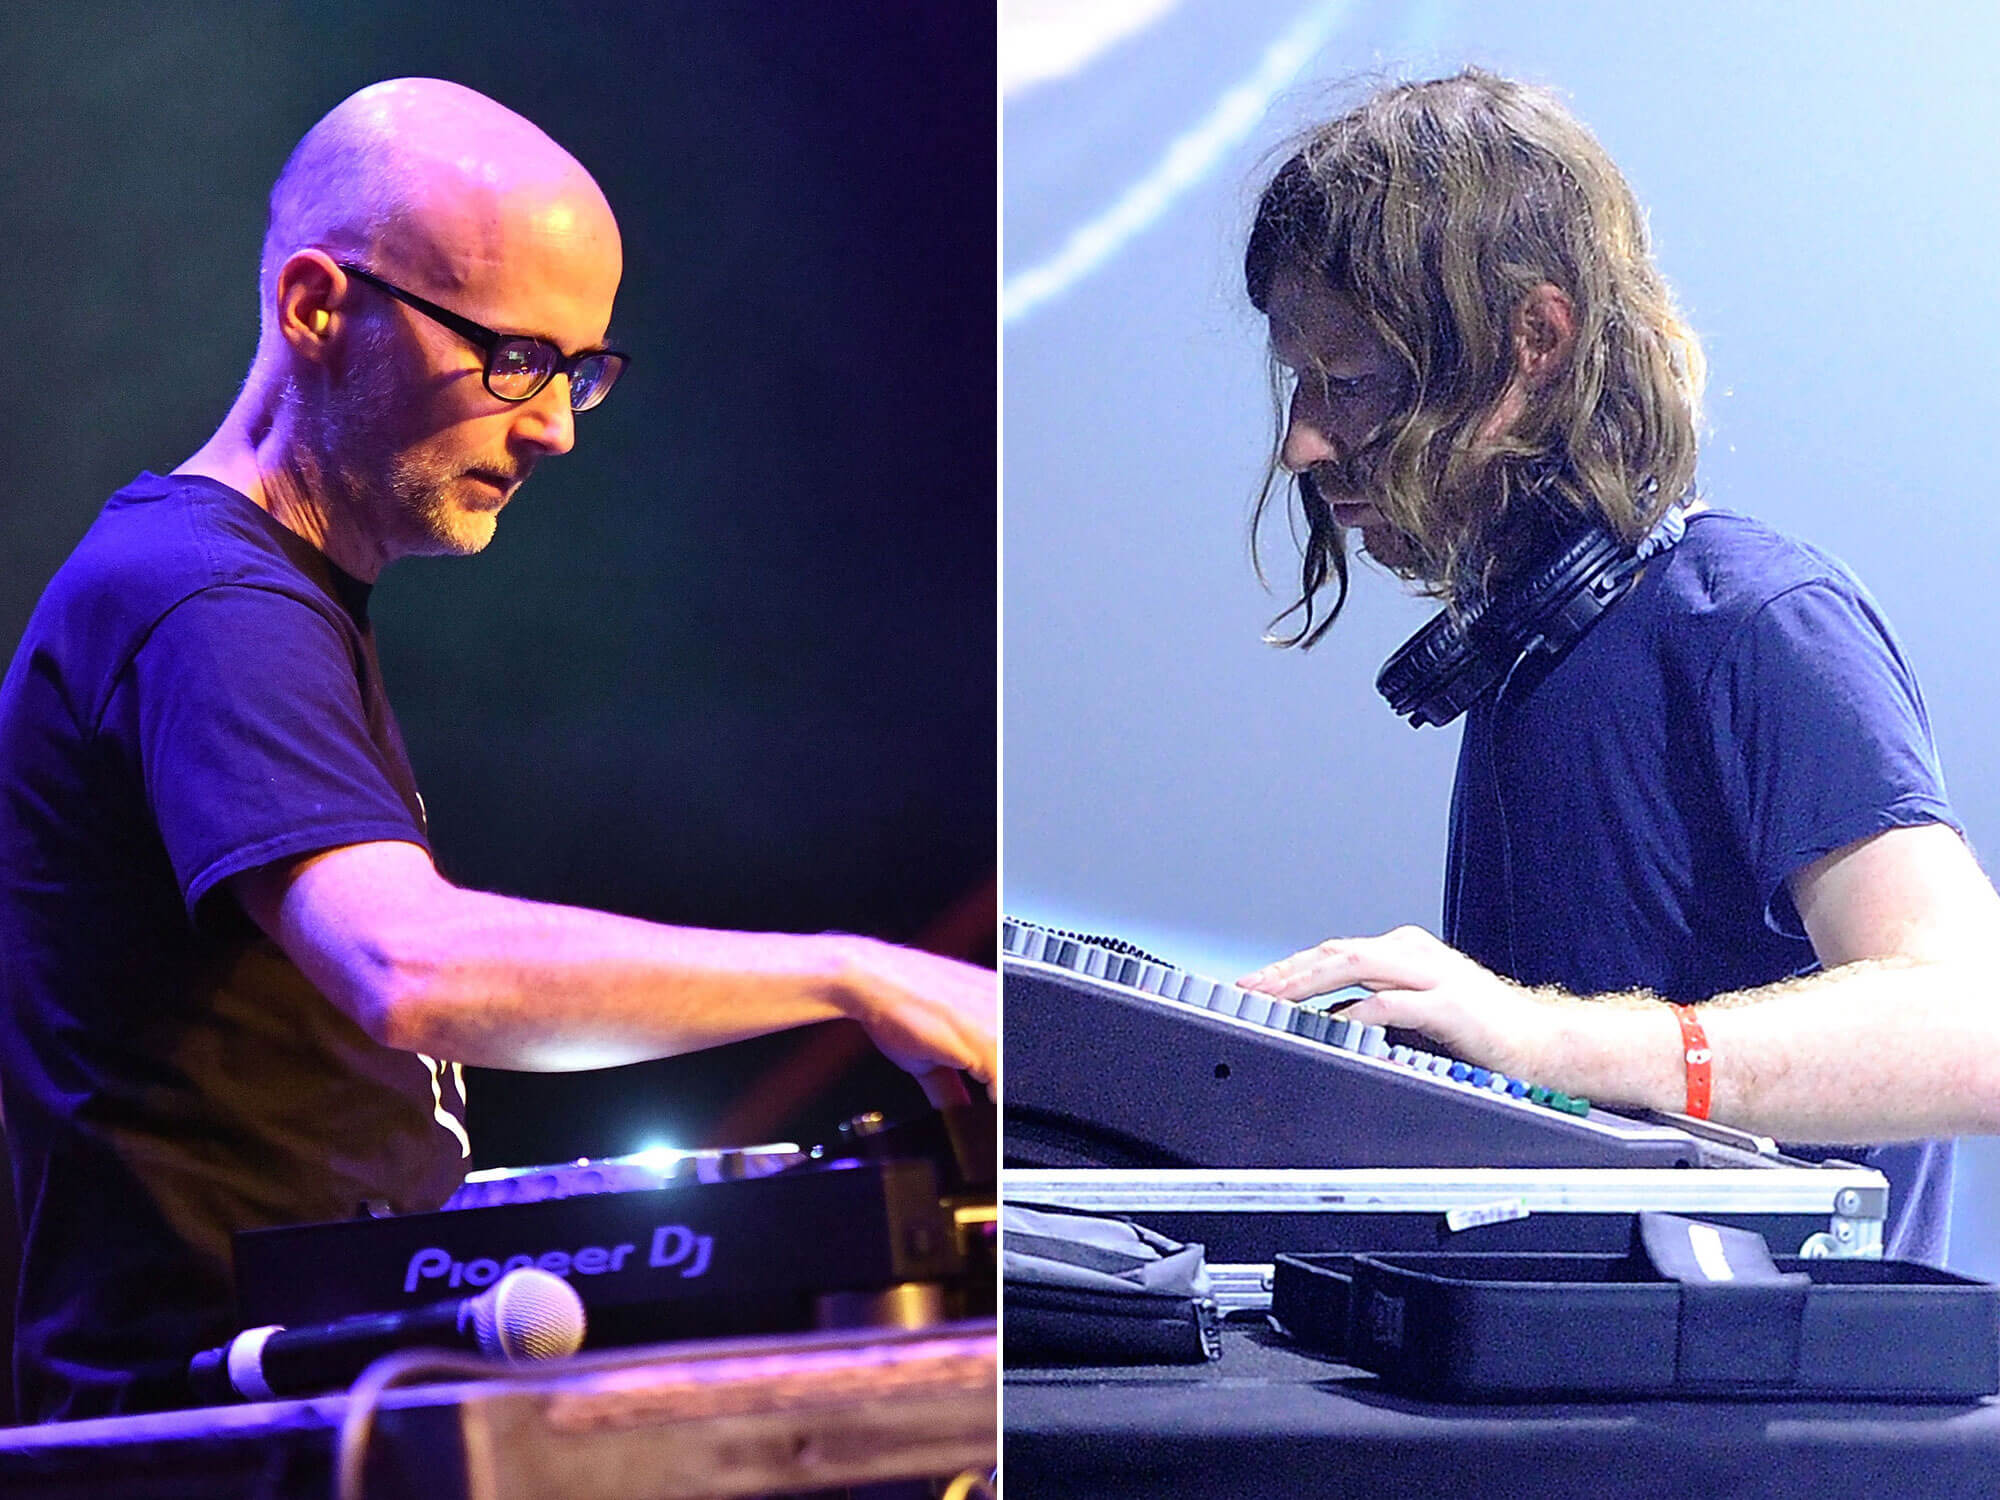 [L-R] Moby and Aphex Twin